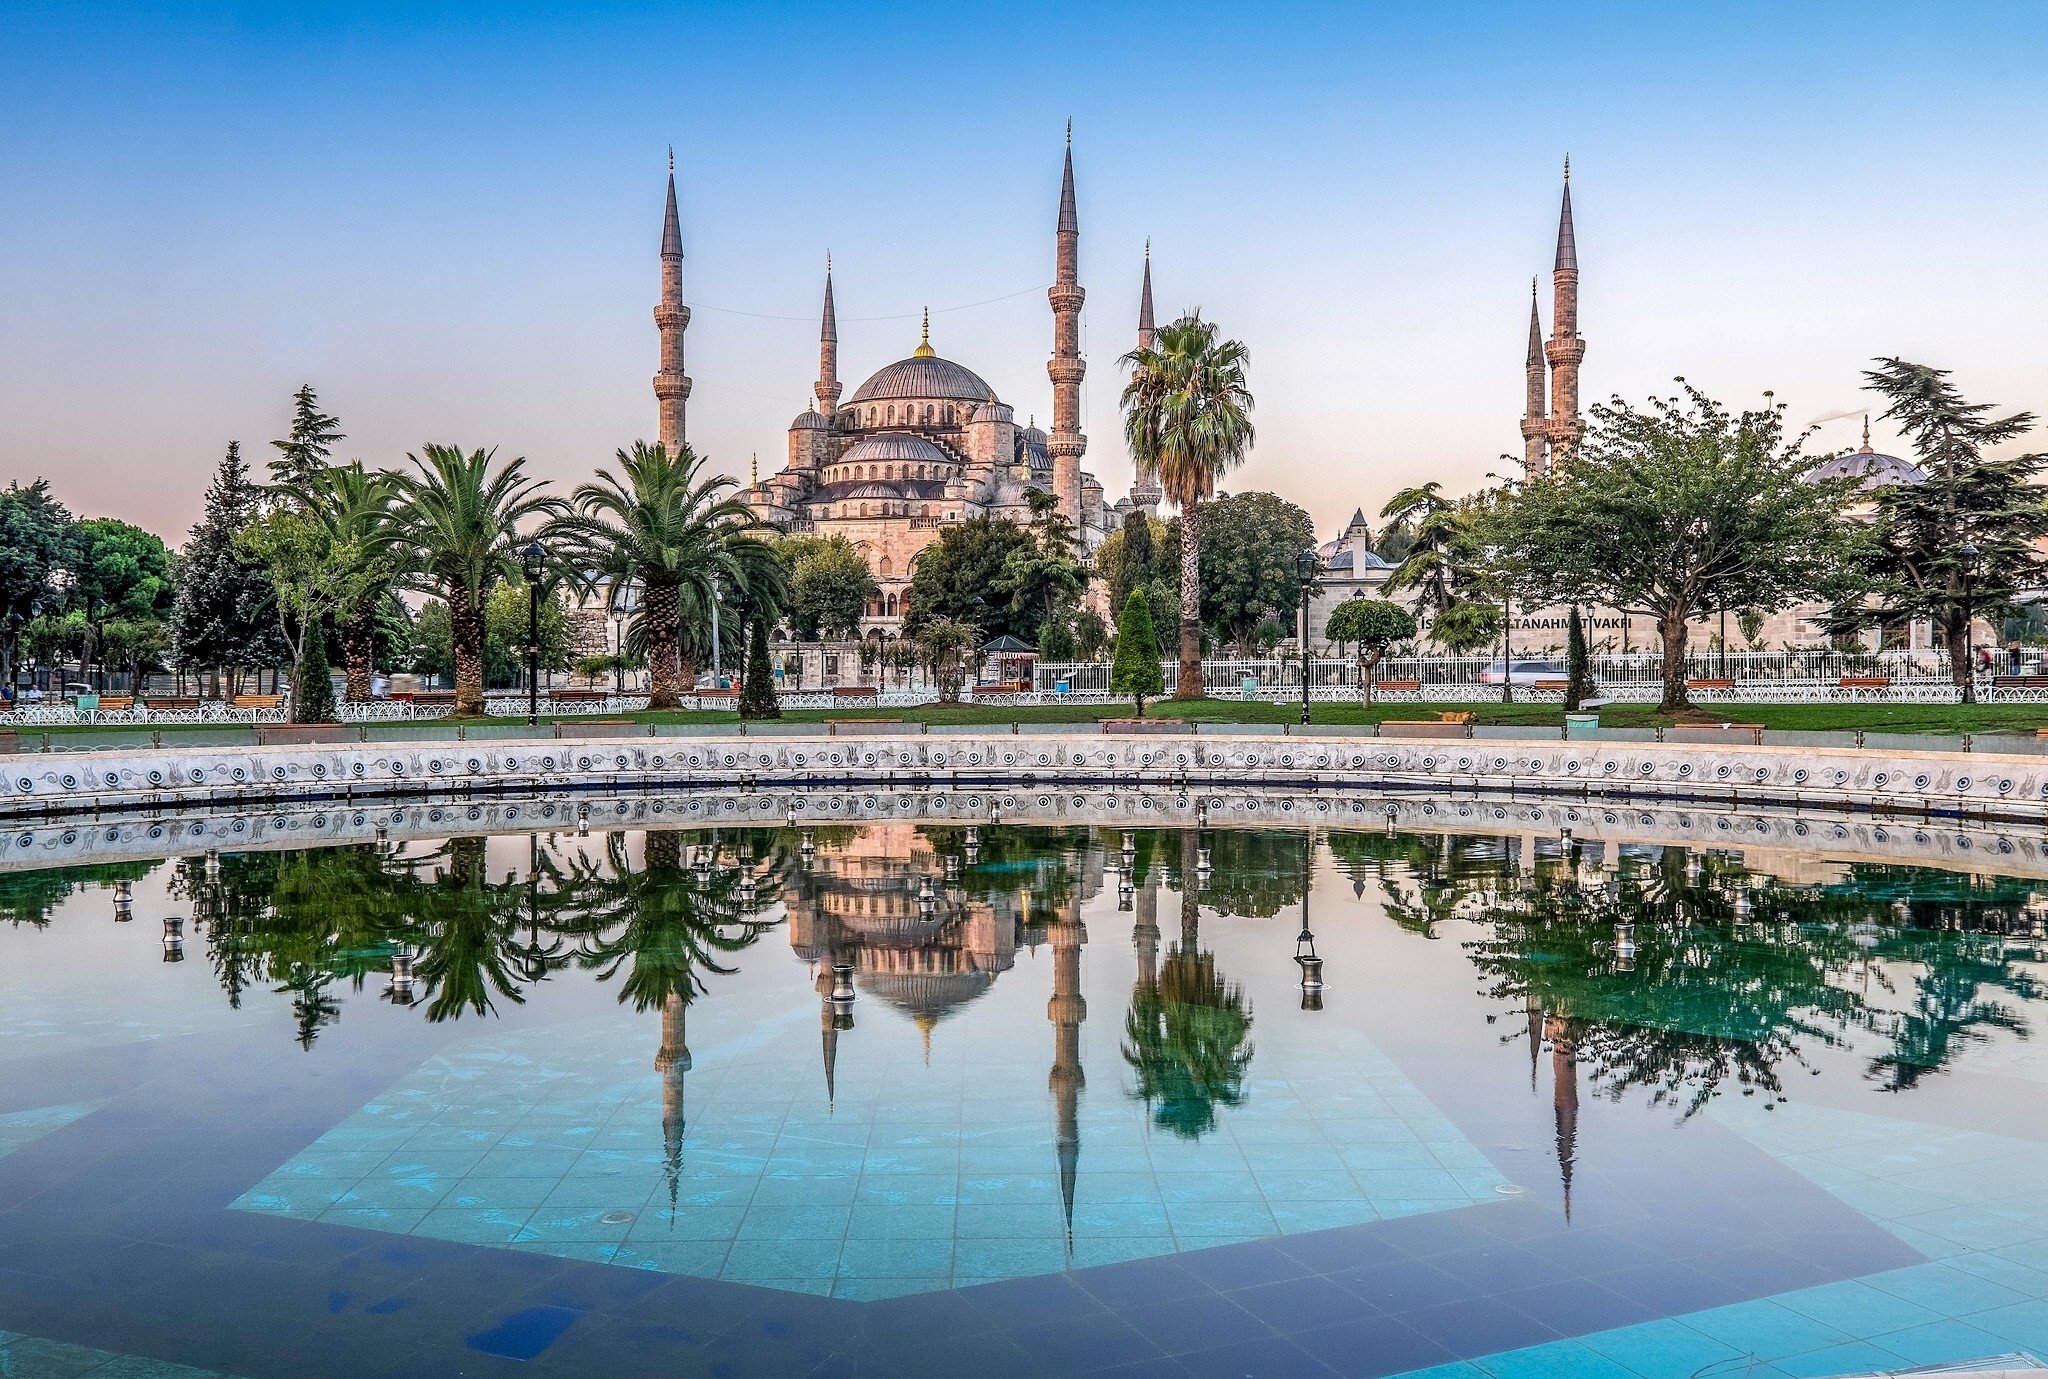 architecture, Cityscape, Istanbul, Turkey, Sultan Ahmed Mosque, Palm trees, Water, Tiles, Reflection, Park Wallpaper